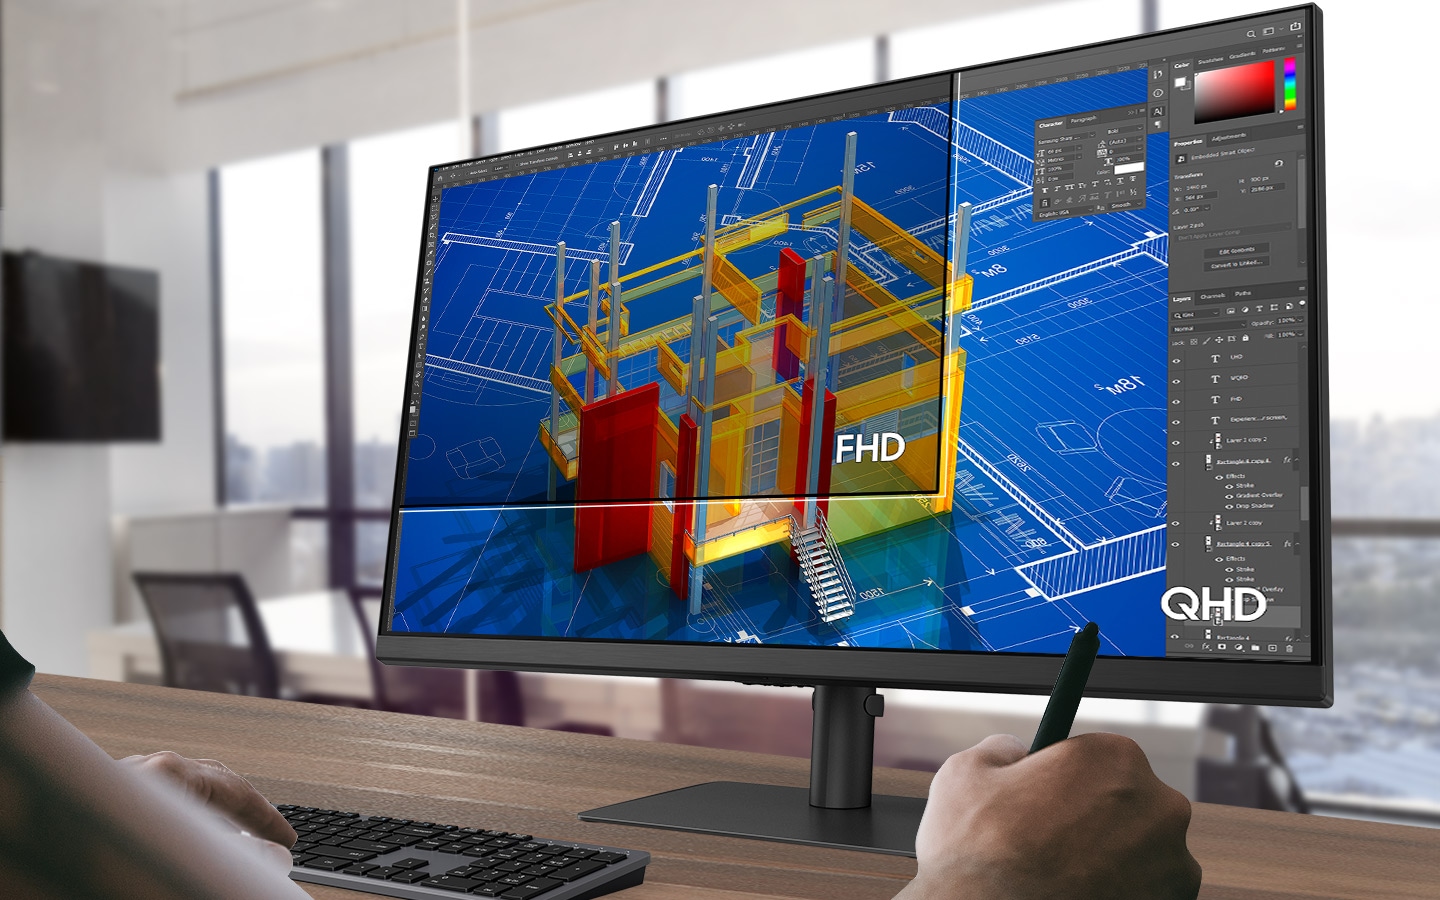 FHD and QHD appear on the screen in order, comparing the available screen areas by resolution.